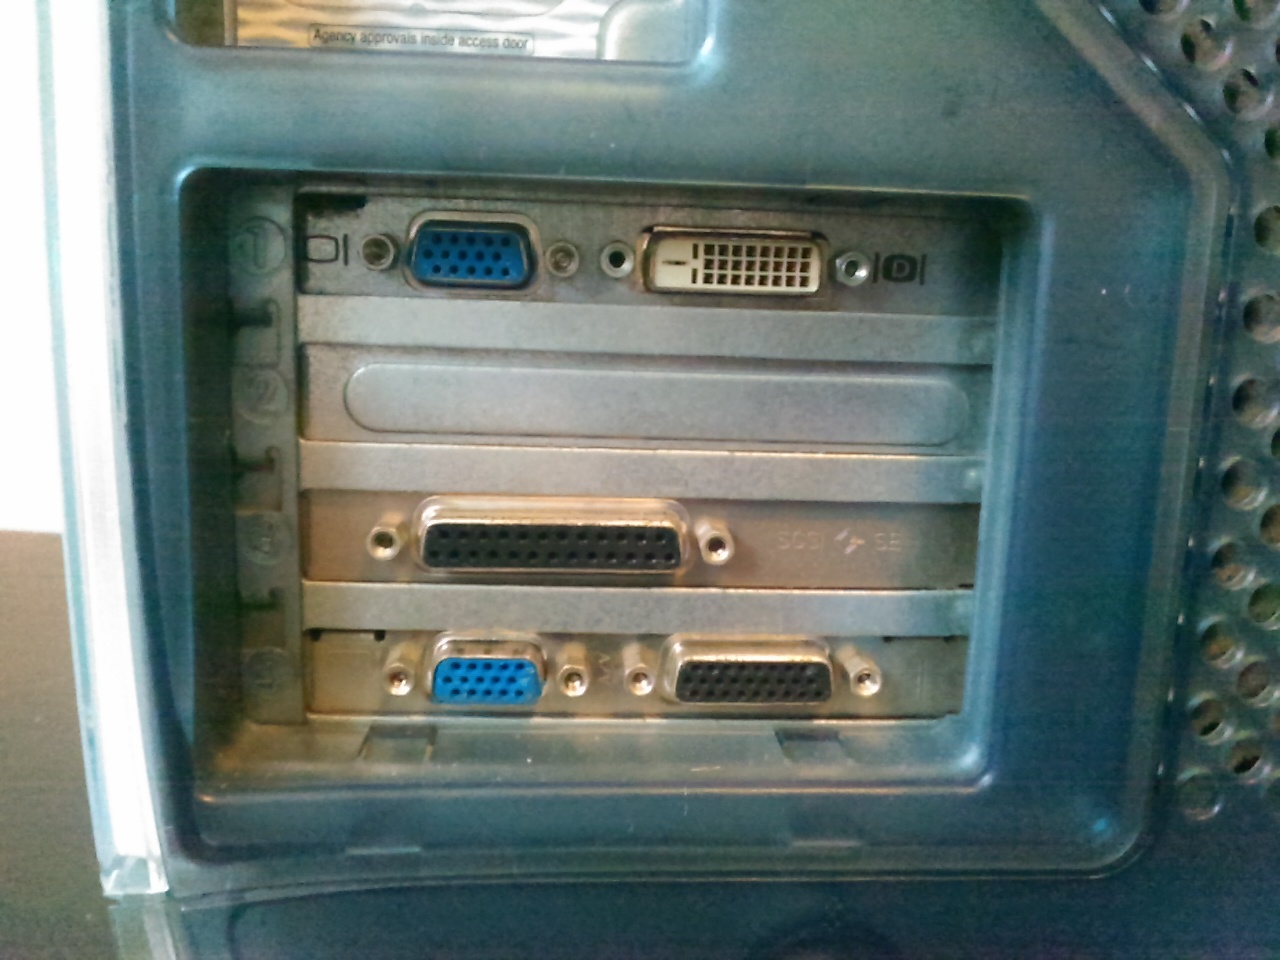 Ports on the back of the computer